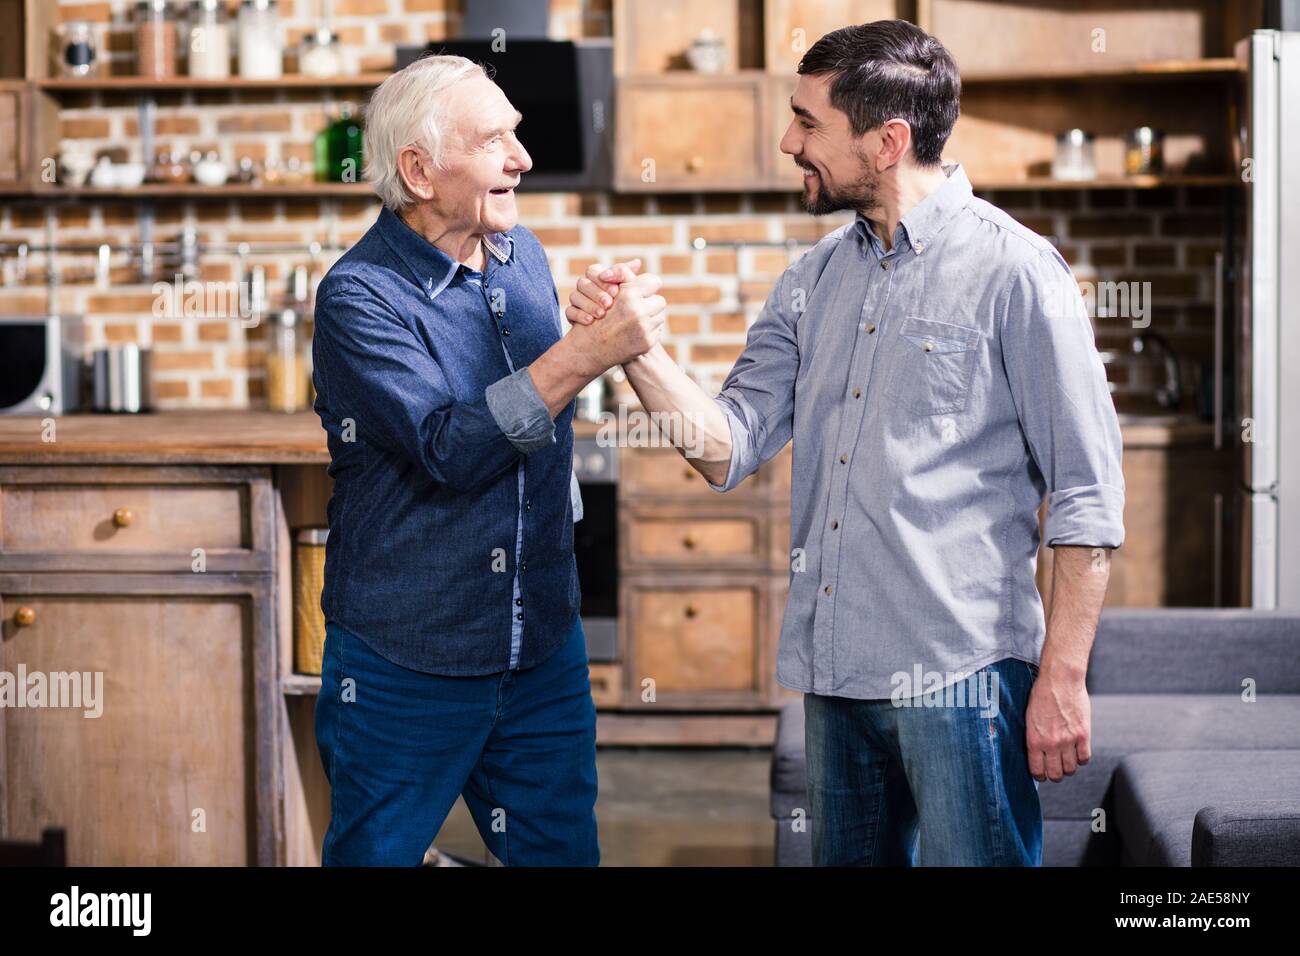 Positive aged father resting with his son Stock Photo